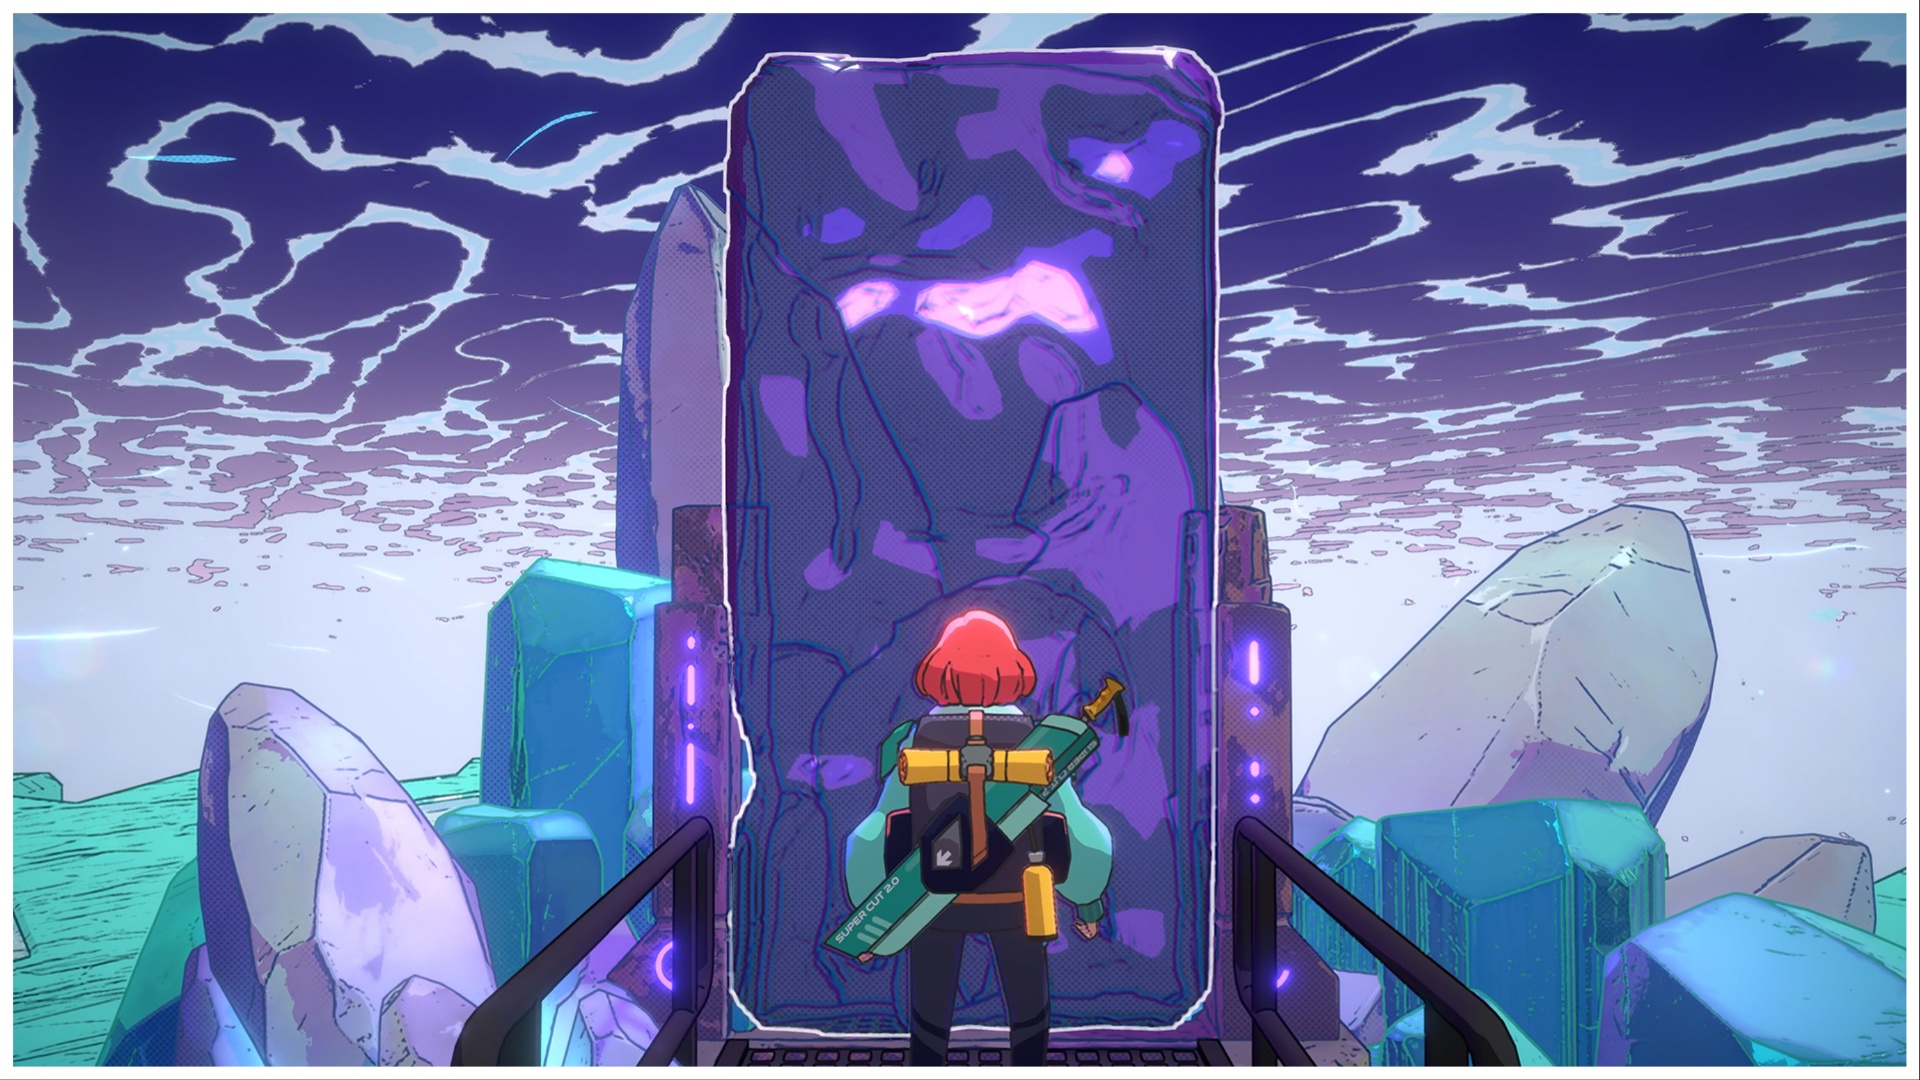 The image shows the main character stood before a purple glowy slab of rock. You can see her snowboard sword fastened to her back as we assume she will be entering the portal-esque.